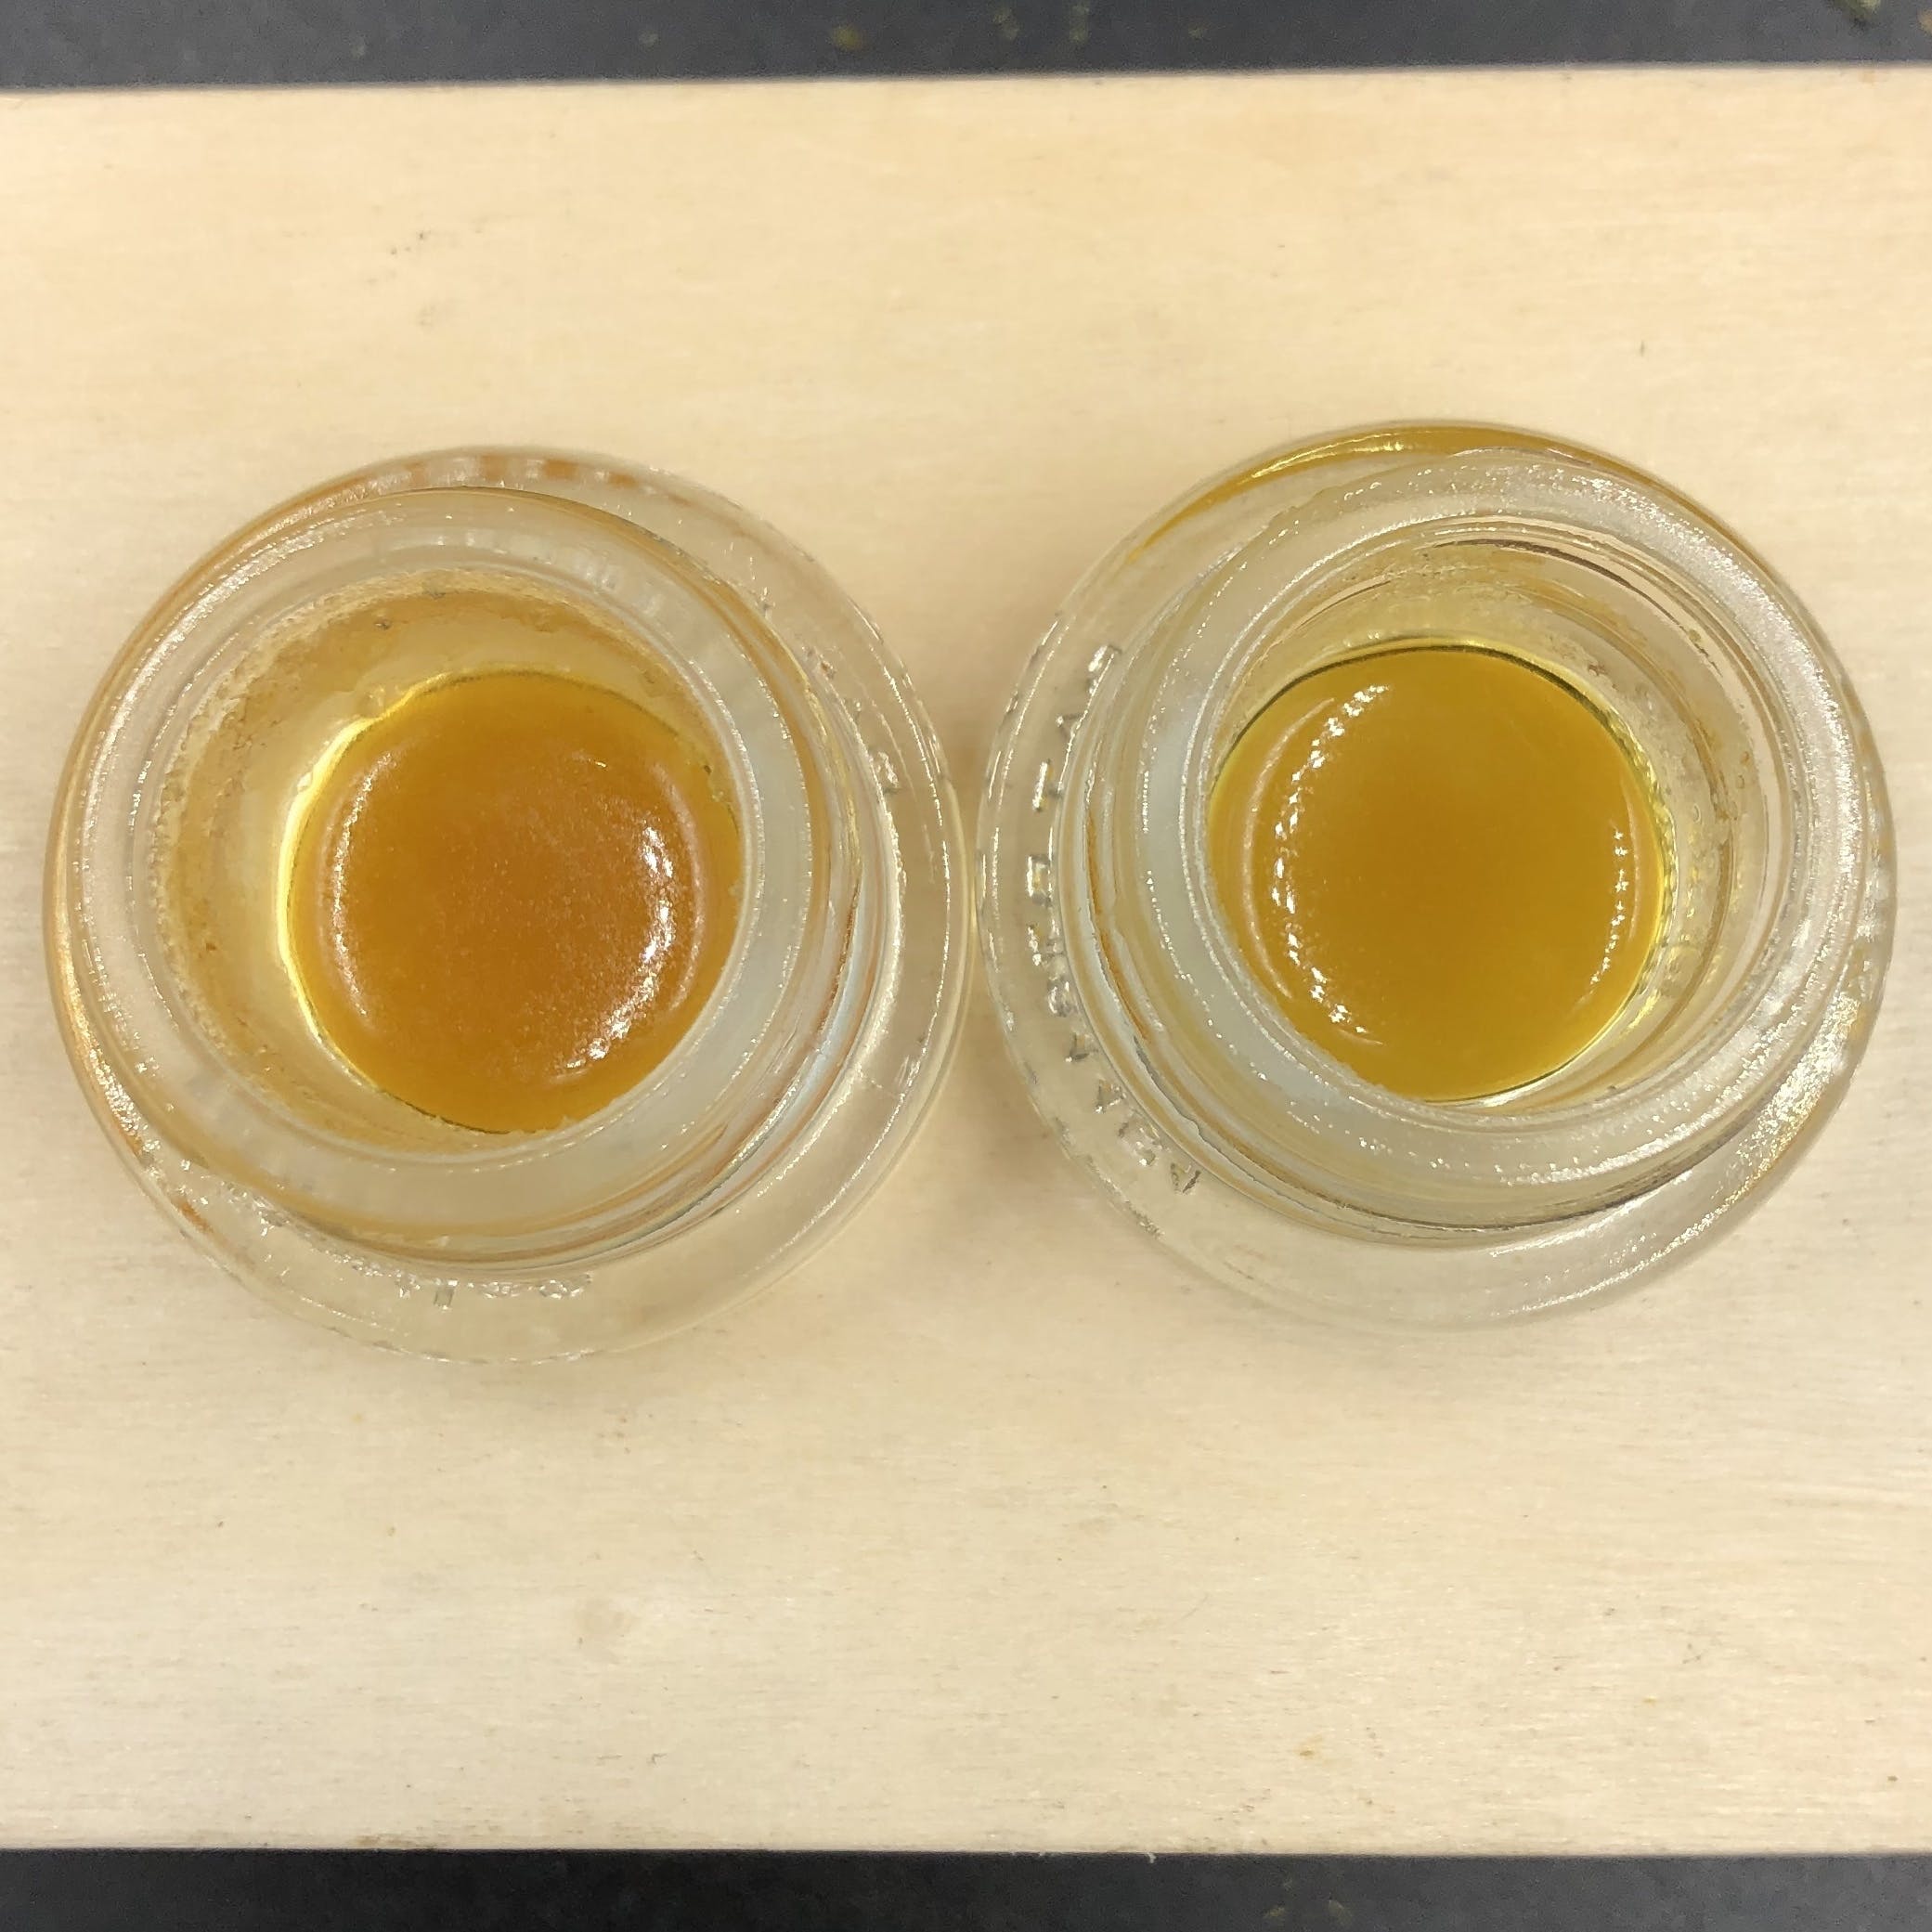 Field Extracts Sauce